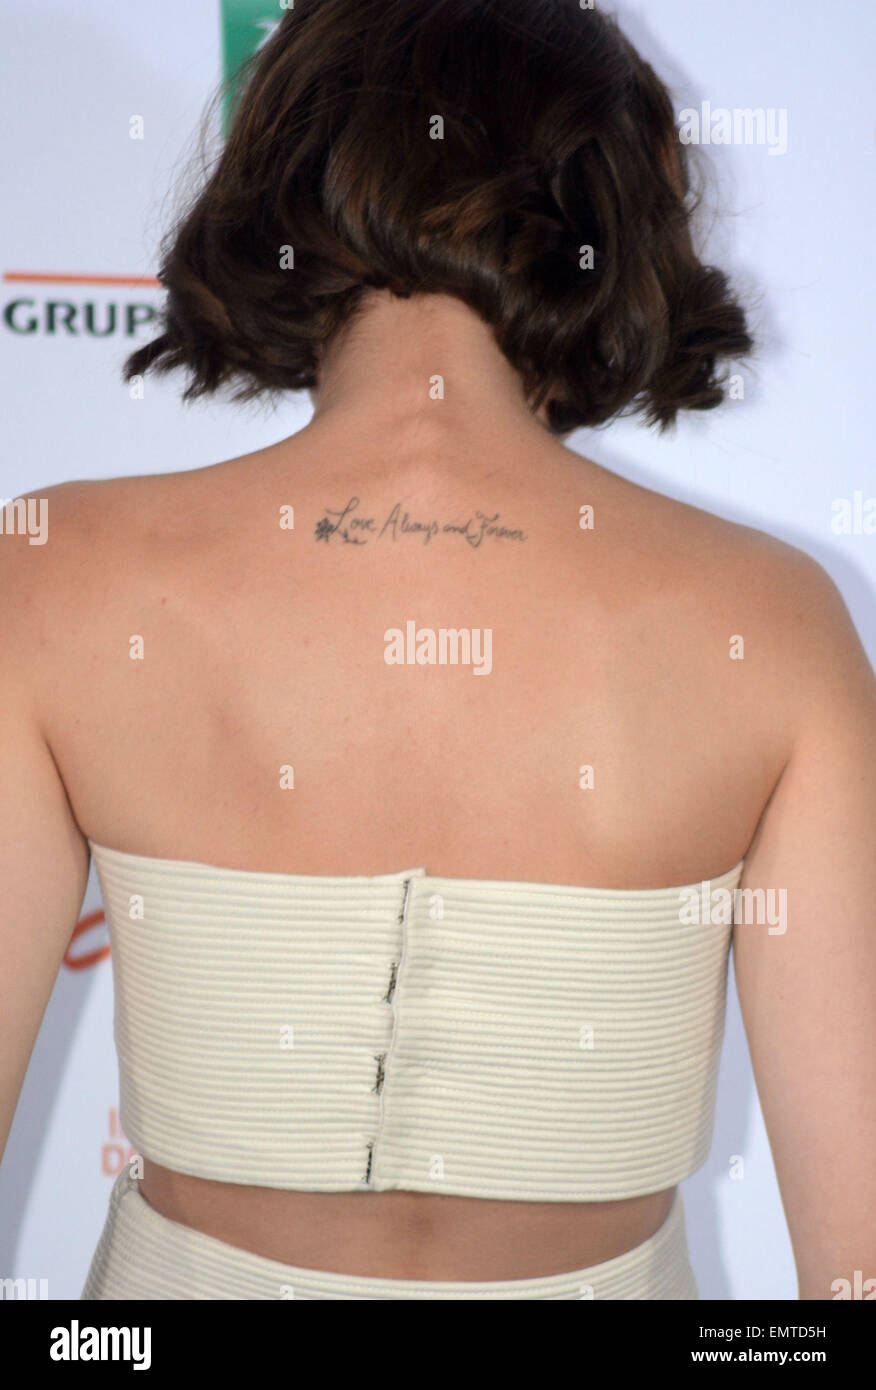 Does Lily Collins Have a Tattoo The Meanings  Tattoo Glee